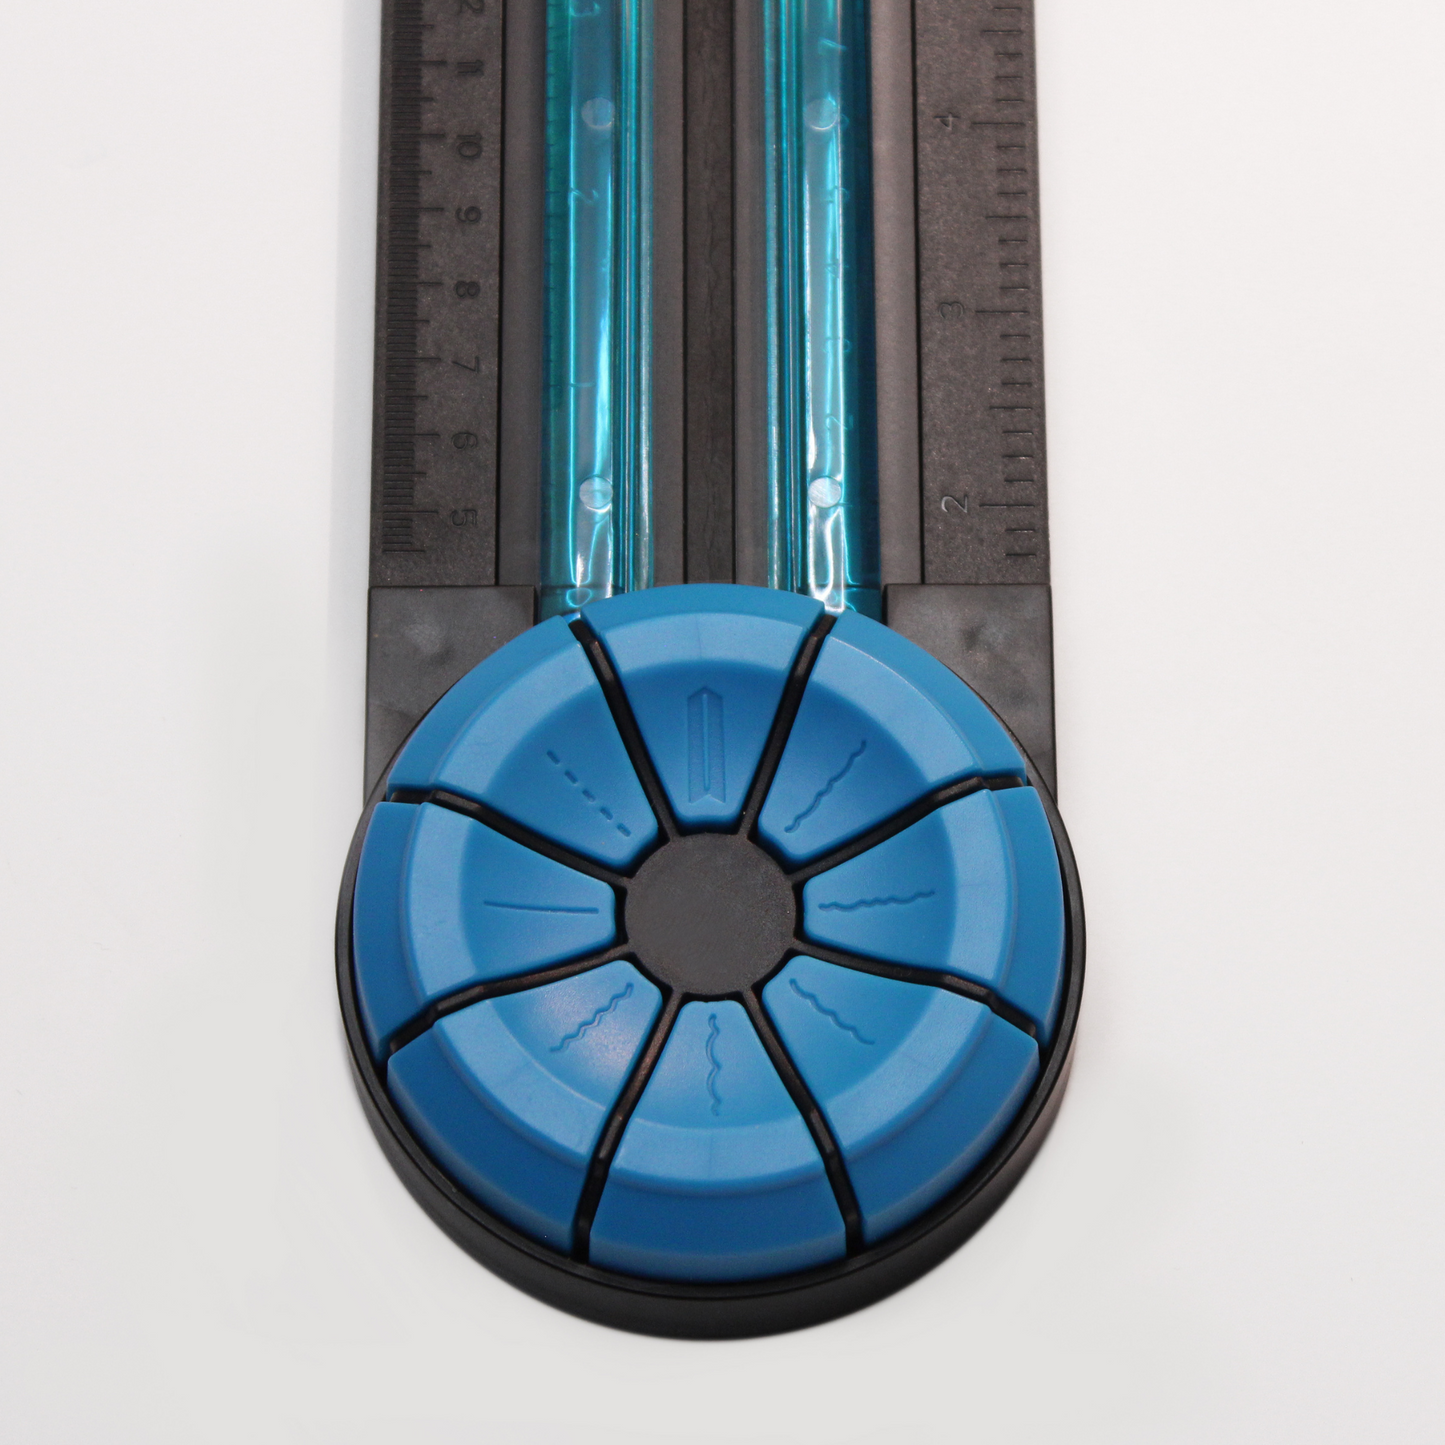 Close-up of the blue dial of an A4 Dial-A-Blade Creative Trimmer, set against the trimmer's ruler for scale, highlighting the selector that allows users to switch between the trimmer's multiple cutting functions.